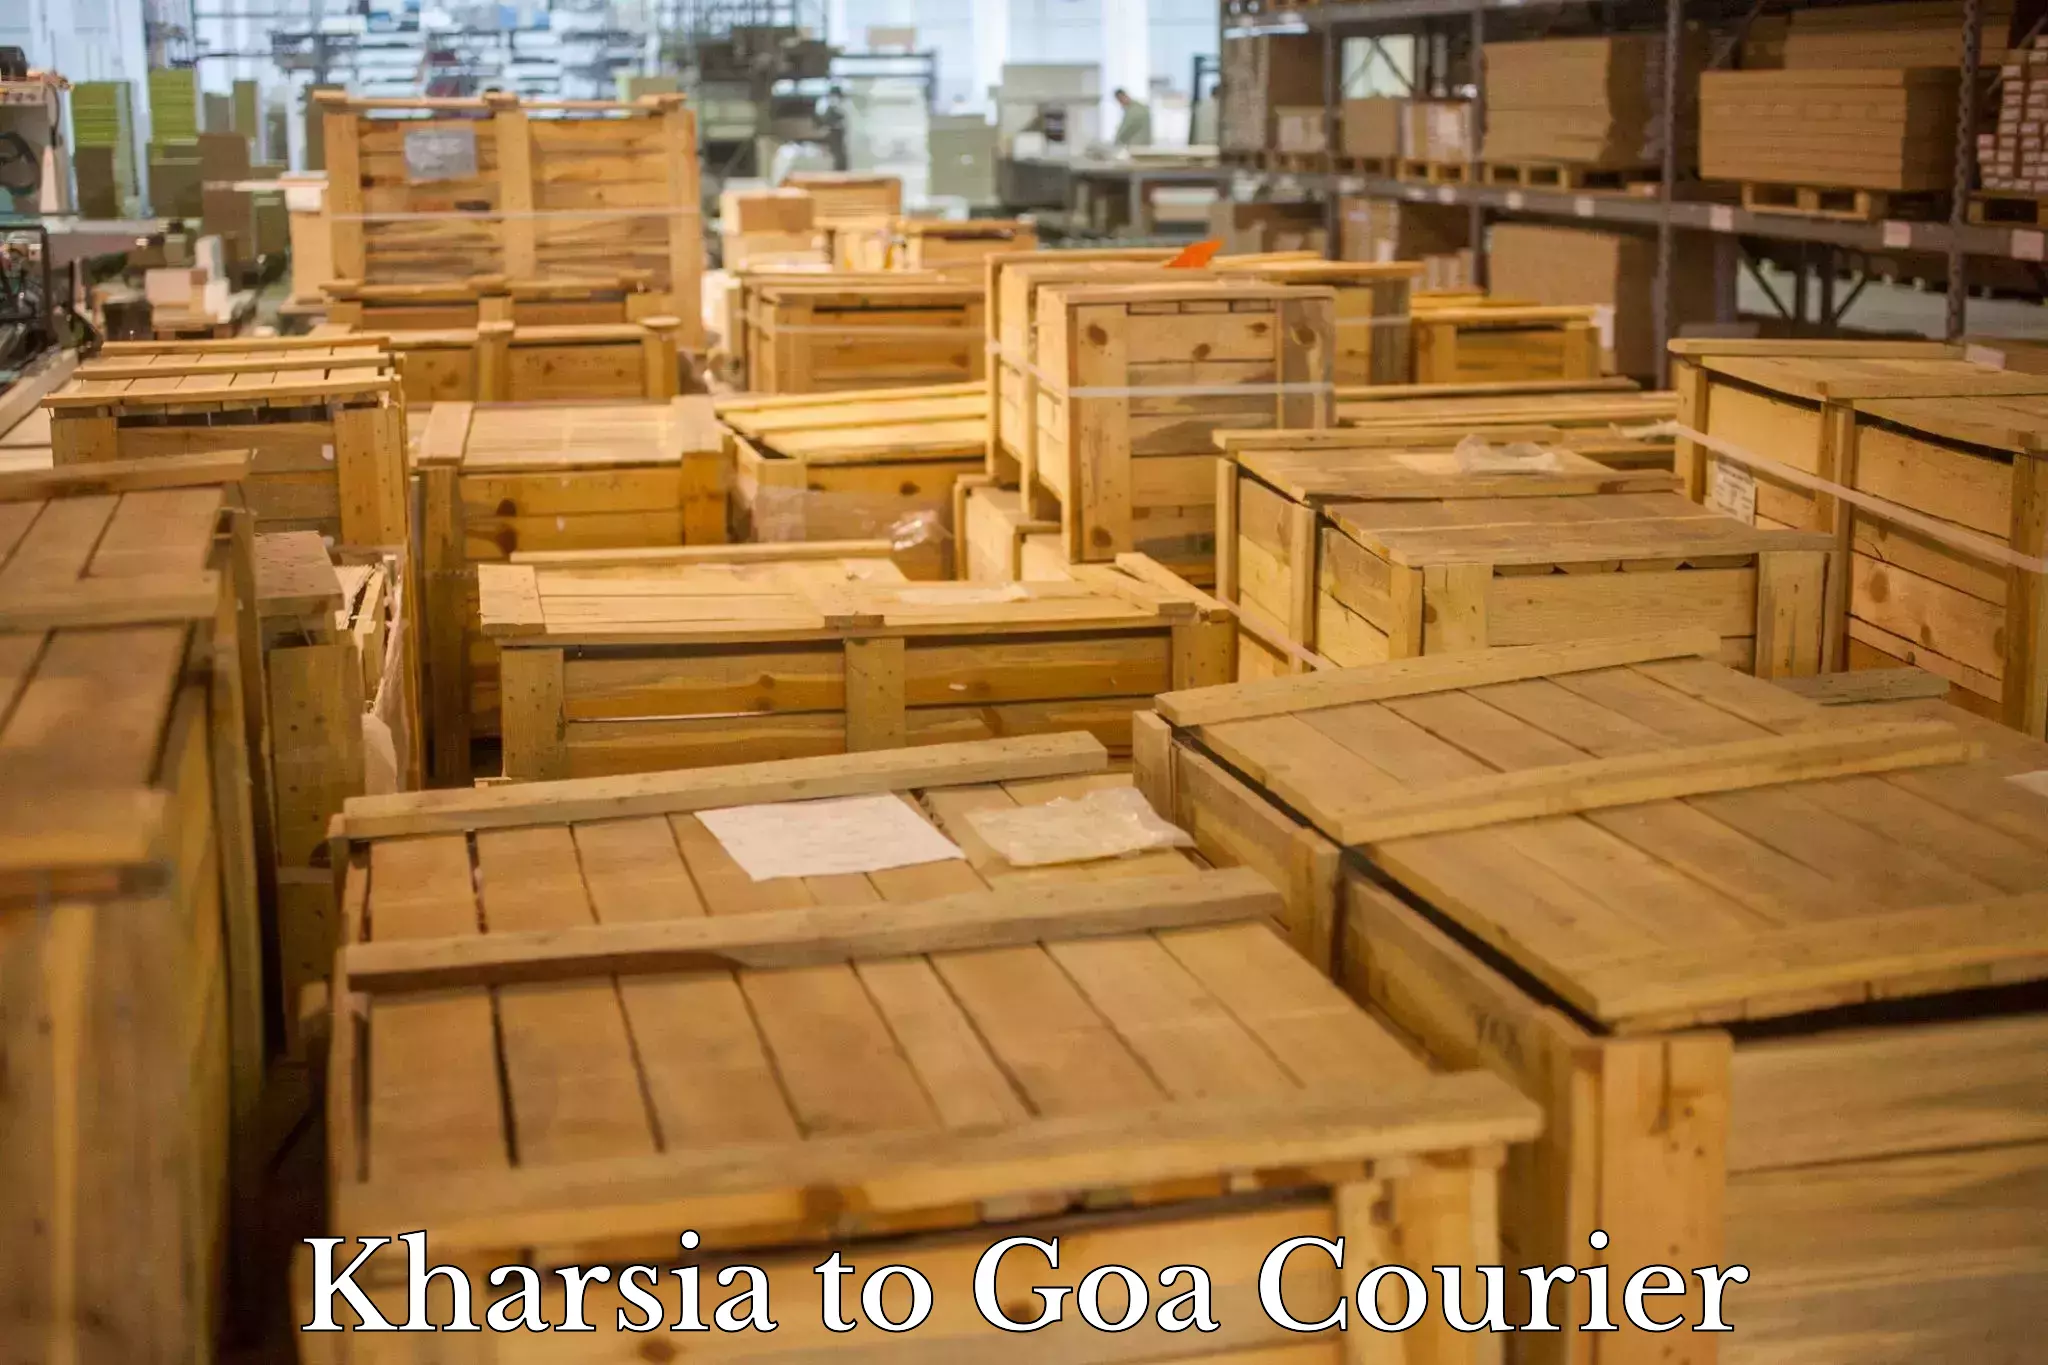 On-call courier service Kharsia to Goa